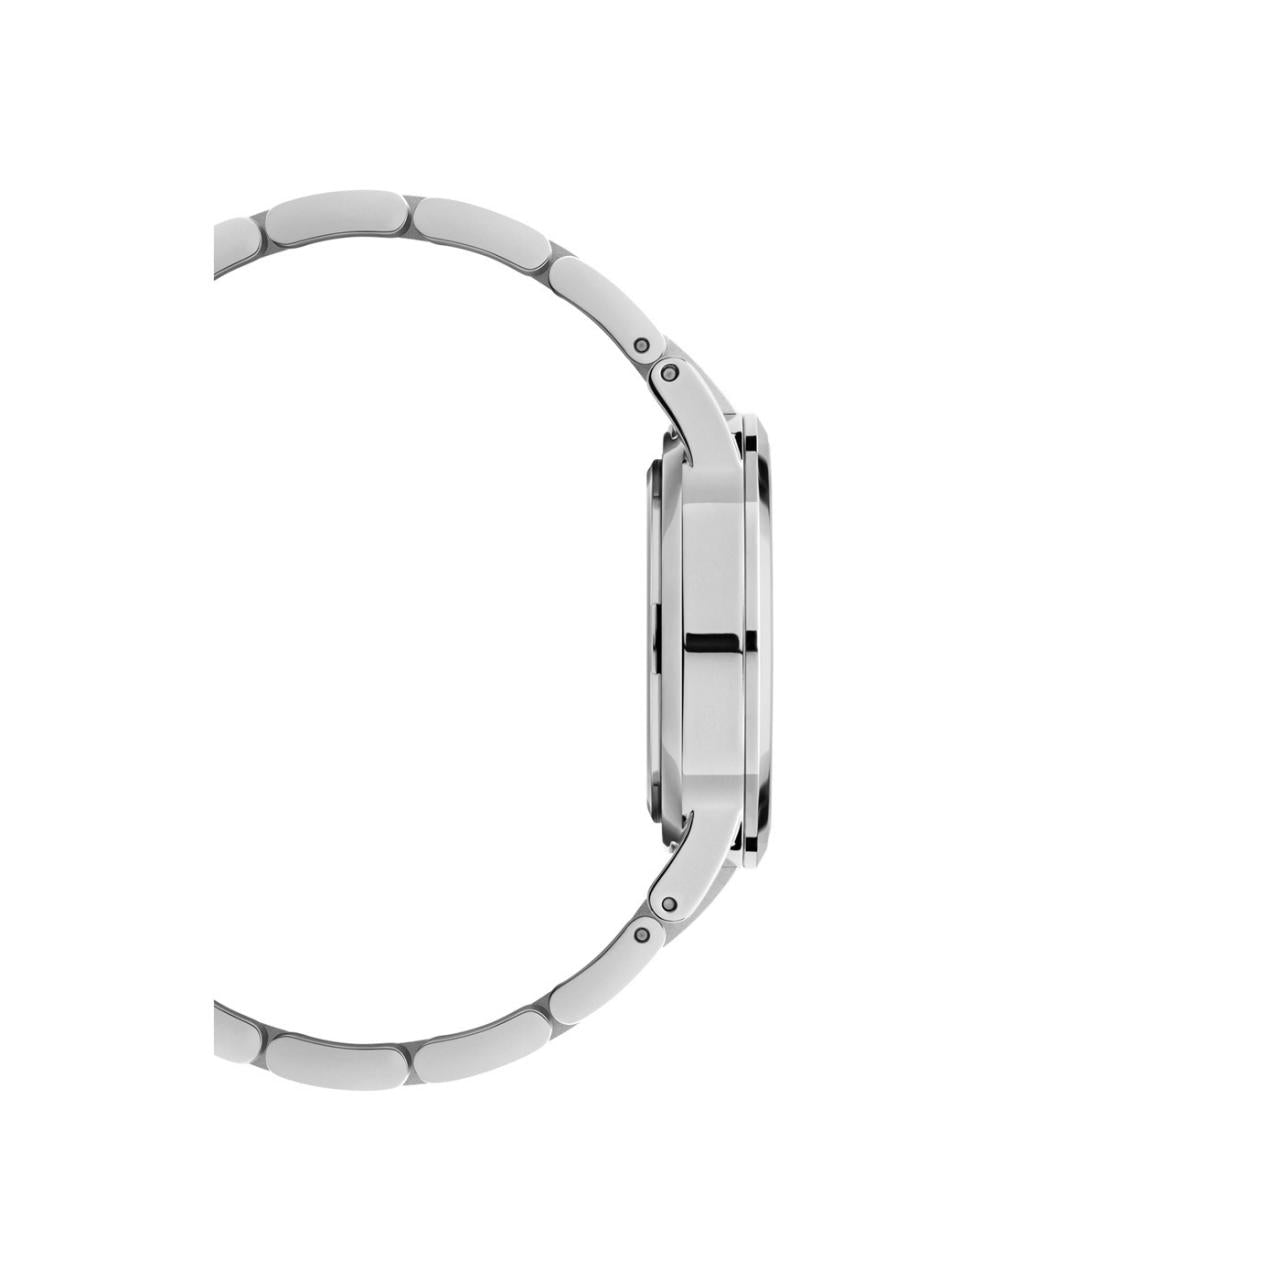 Daniel Wellington 28mm Stainless Steel Iconic Link Strap Watch with White Dial